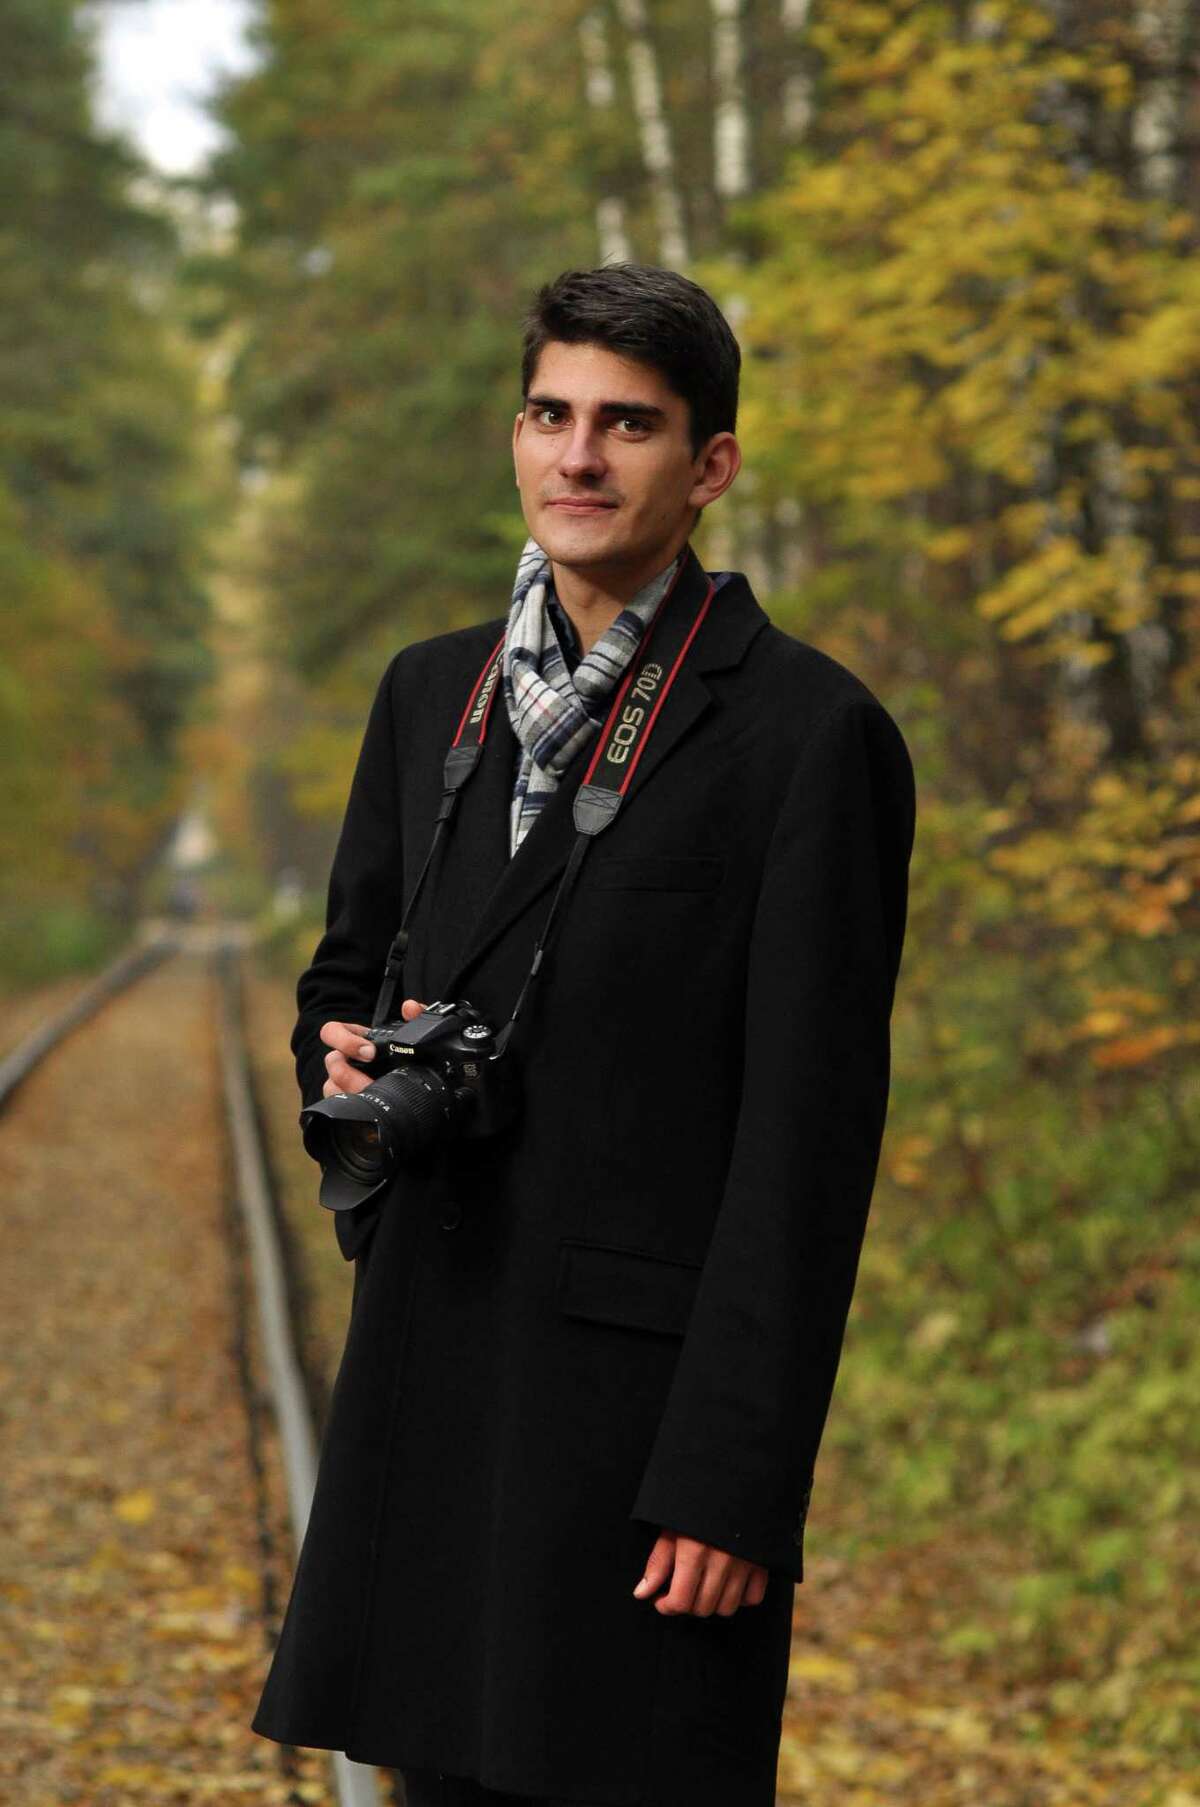 "Trainspotter" Mikhail Korotkov poses for a portrait in an undisclosed location.